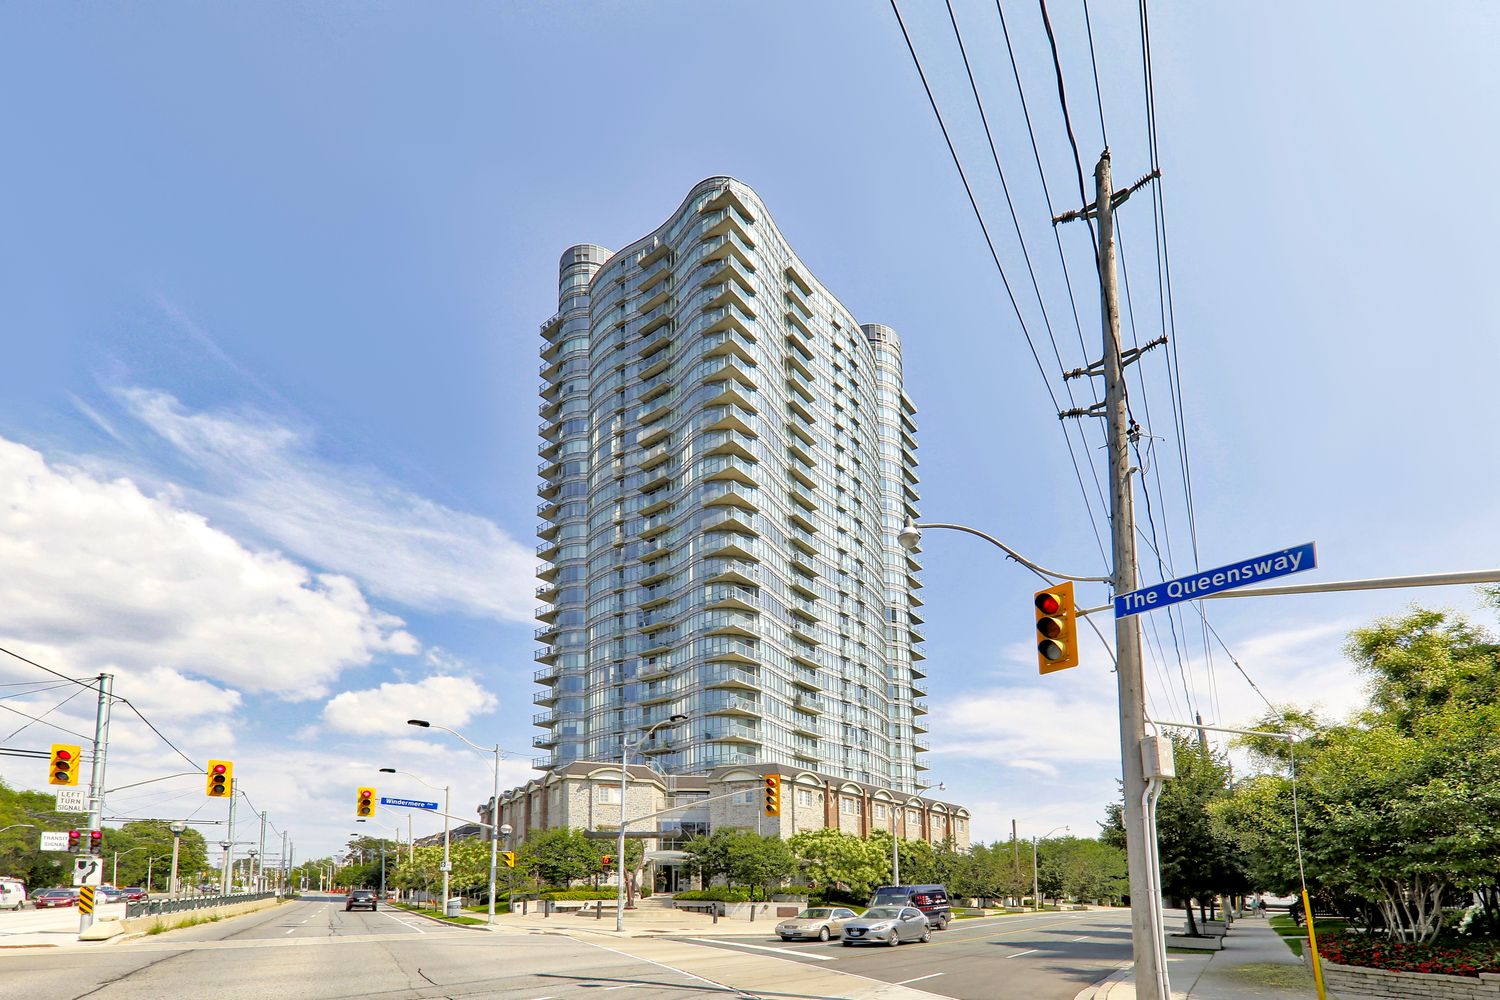 15 Windermere Avenue. Windermere By The Lake is located in  West End, Toronto - image #1 of 7